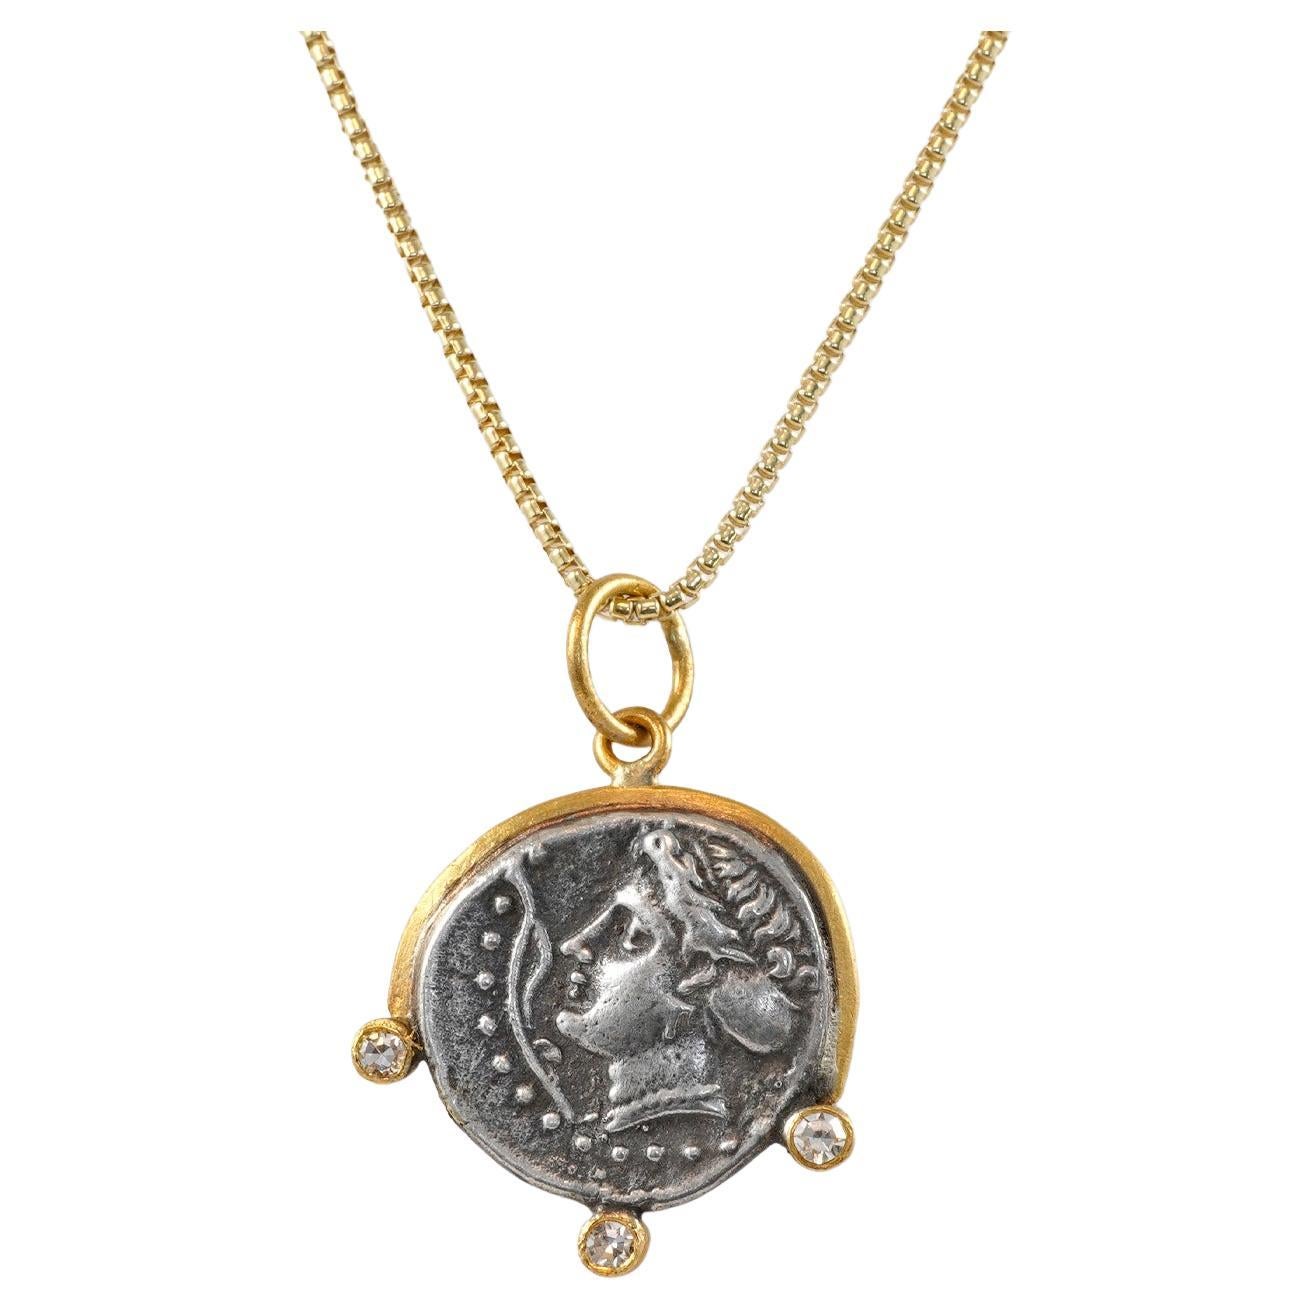 Ancient, Sinope - Water Nymph, Tetradrachm Charm Coin (Replica) Pendant, 24kt Gold, Silver & 0.06ct Diamonds

Sterling Silver coin is a replica coin from those in the Turkish Museum. 360–320 B.C.

3 Diamonds - 0.06cts
24kt Gold 995 - 1.20